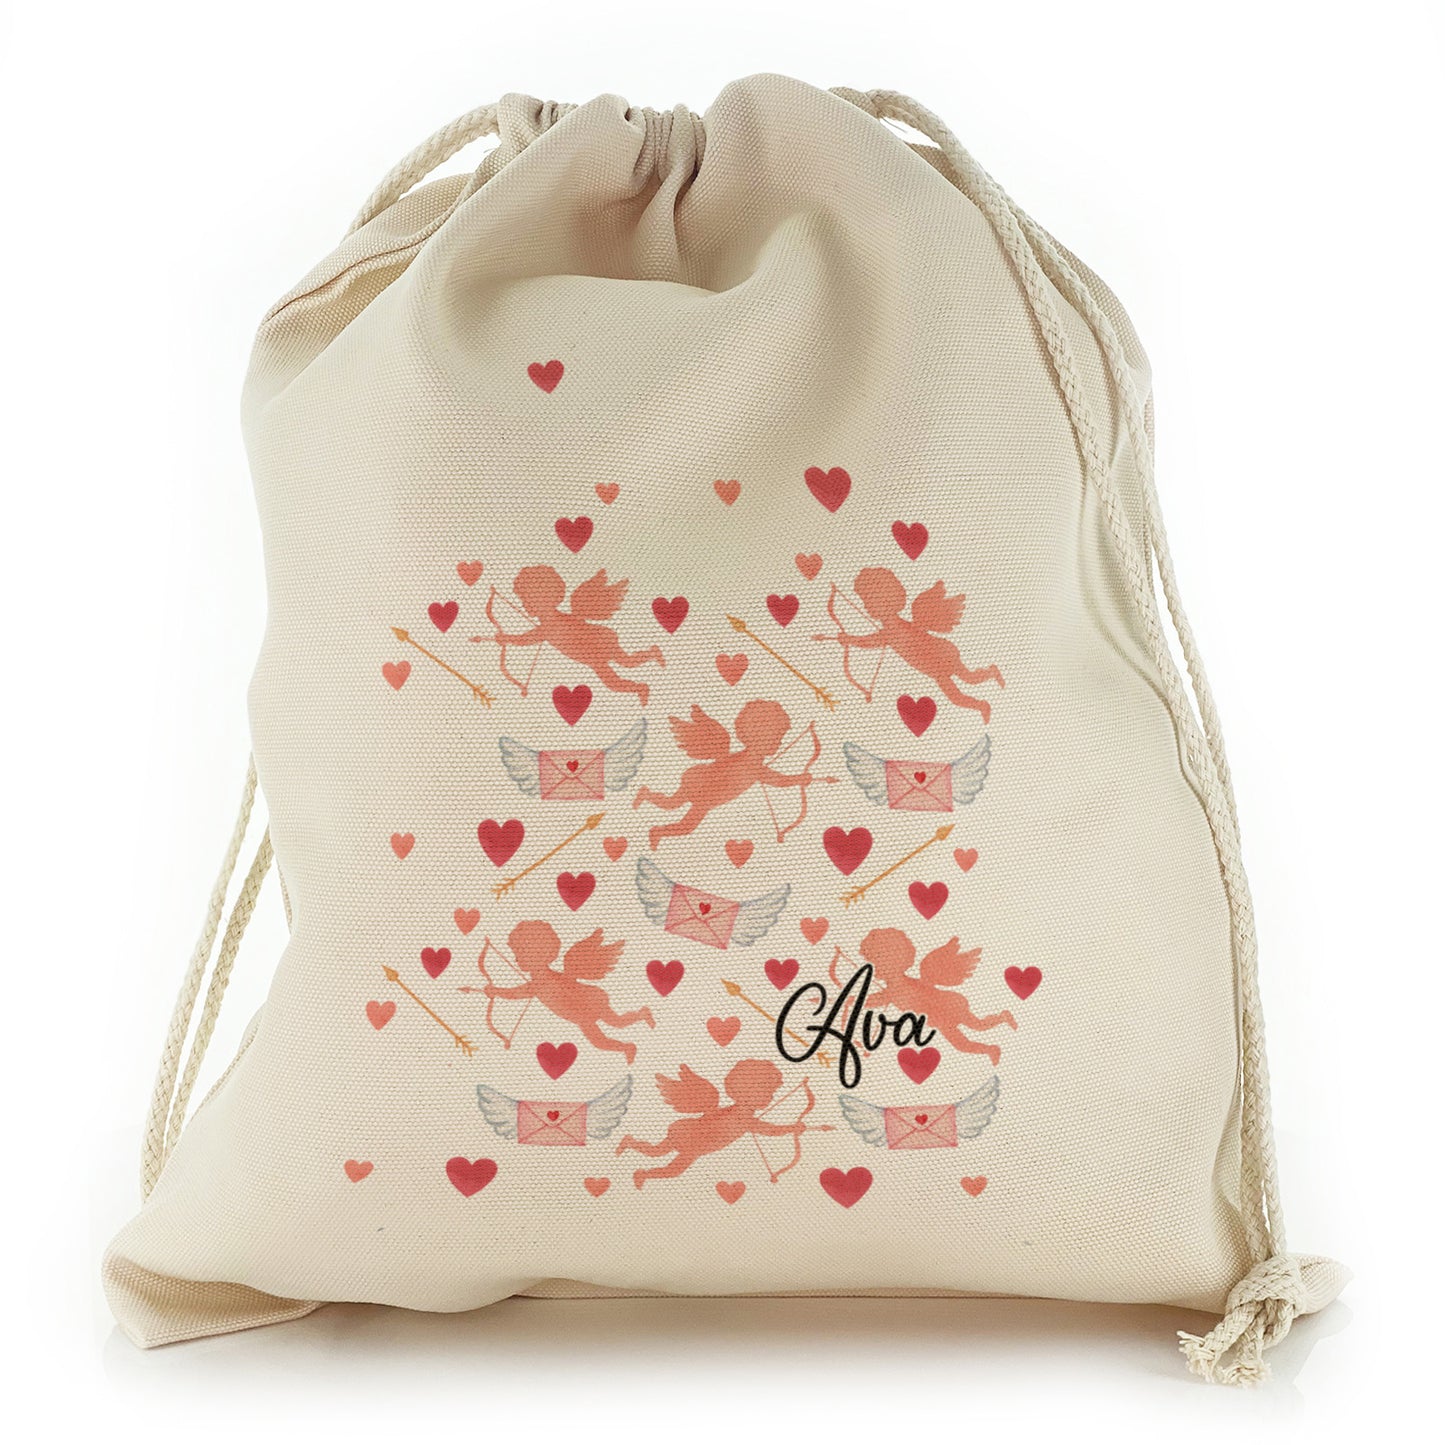 Personalised Canvas Sack with Stylish Text and Cupid Hearts Print